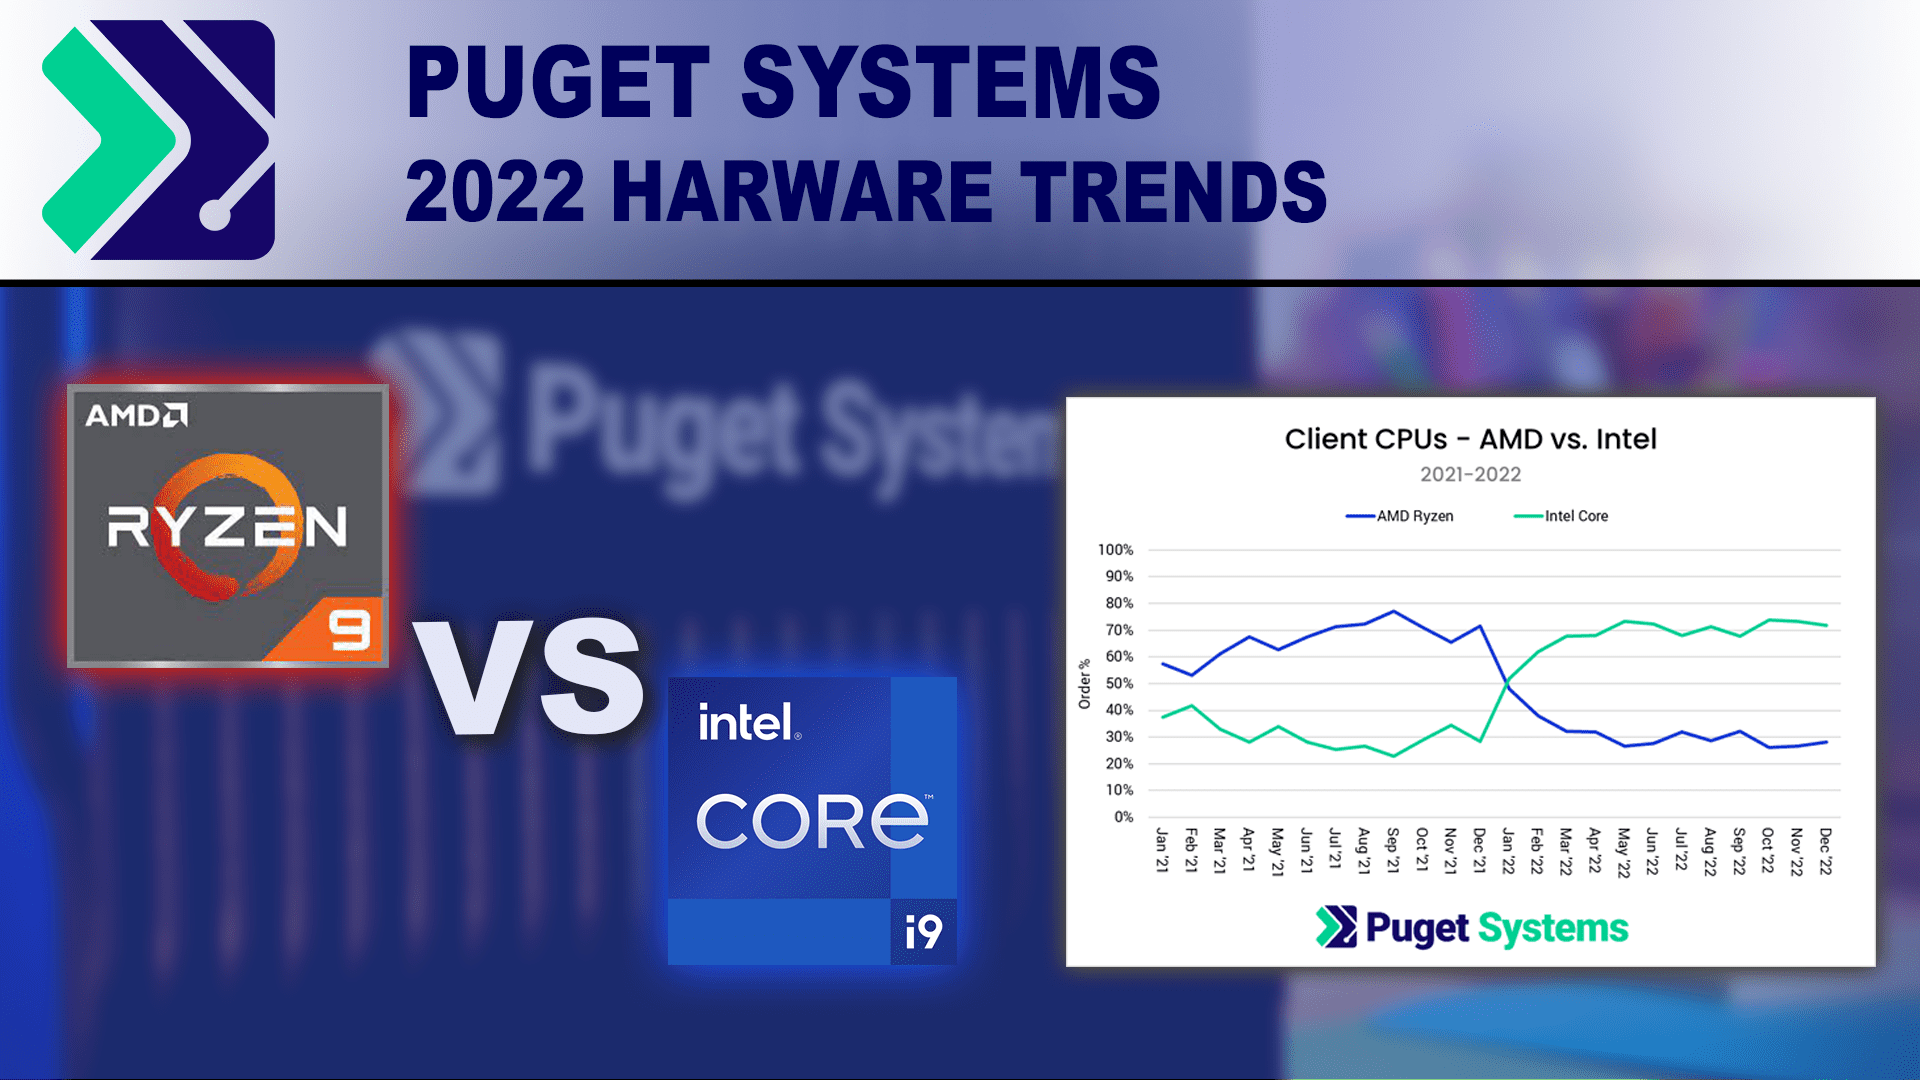 Puget Systems Hardware Trends of 2022